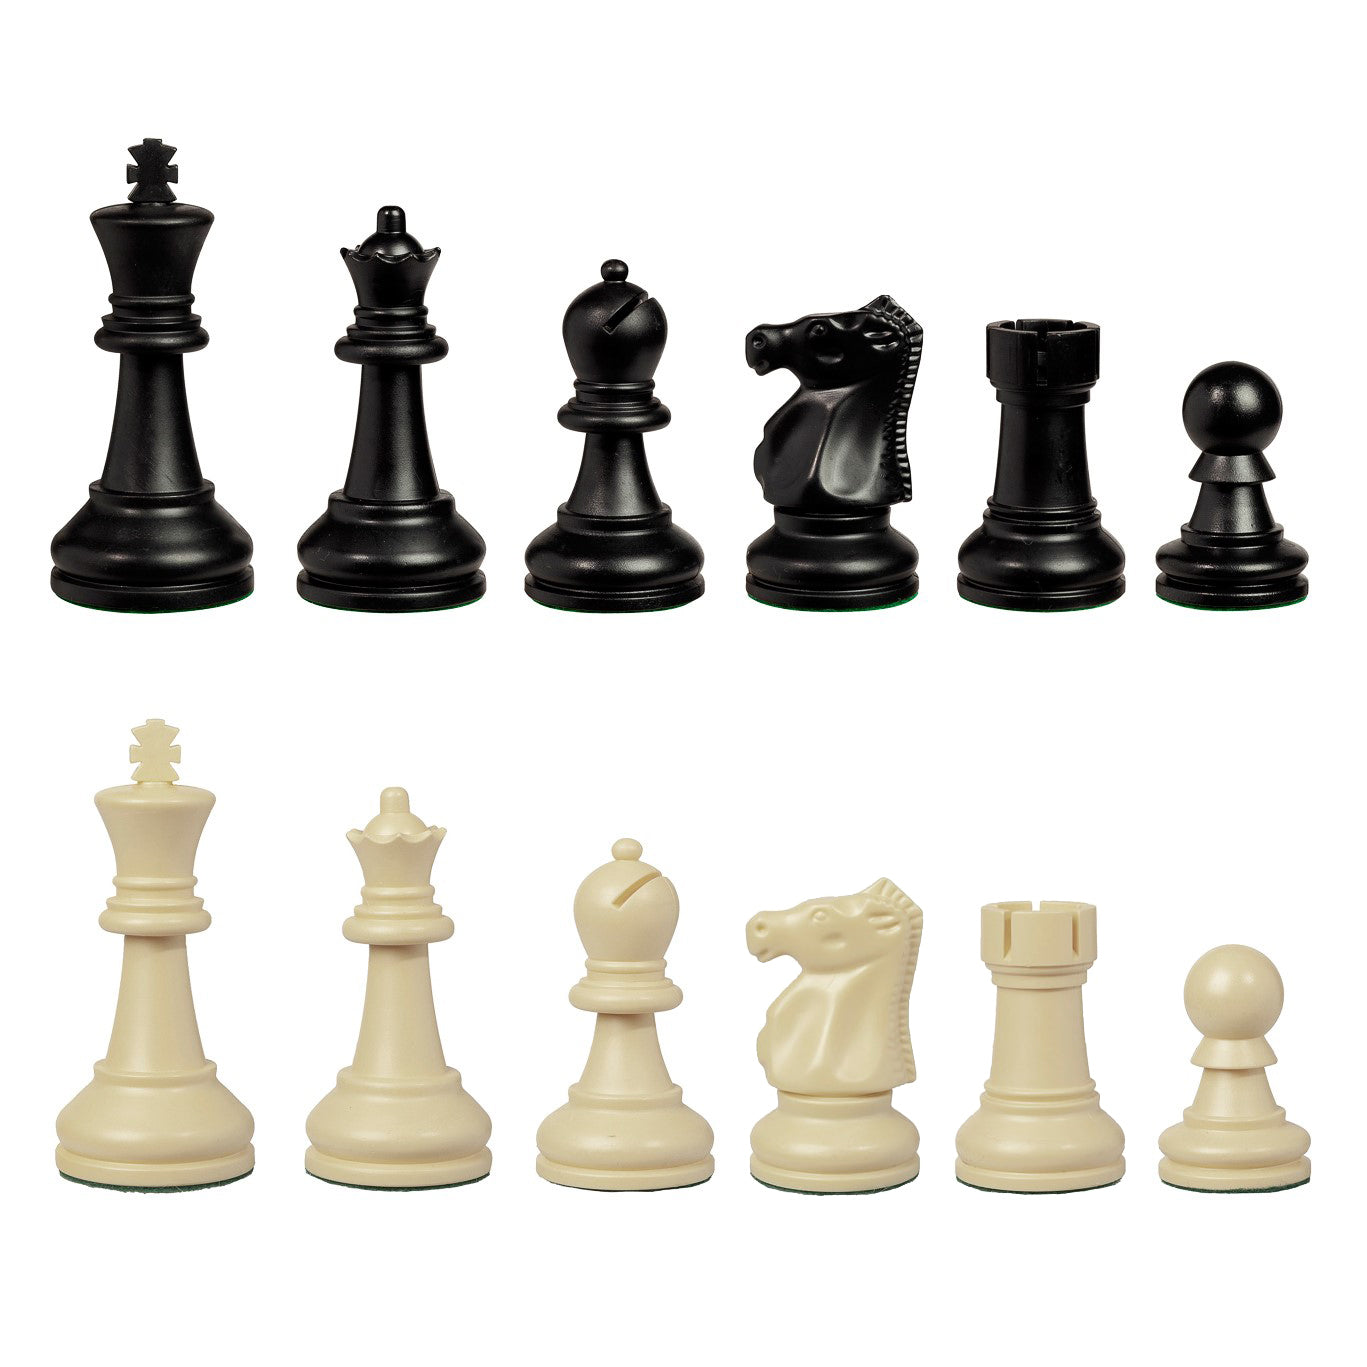 Anatomy and Set Up of Chess Pieces